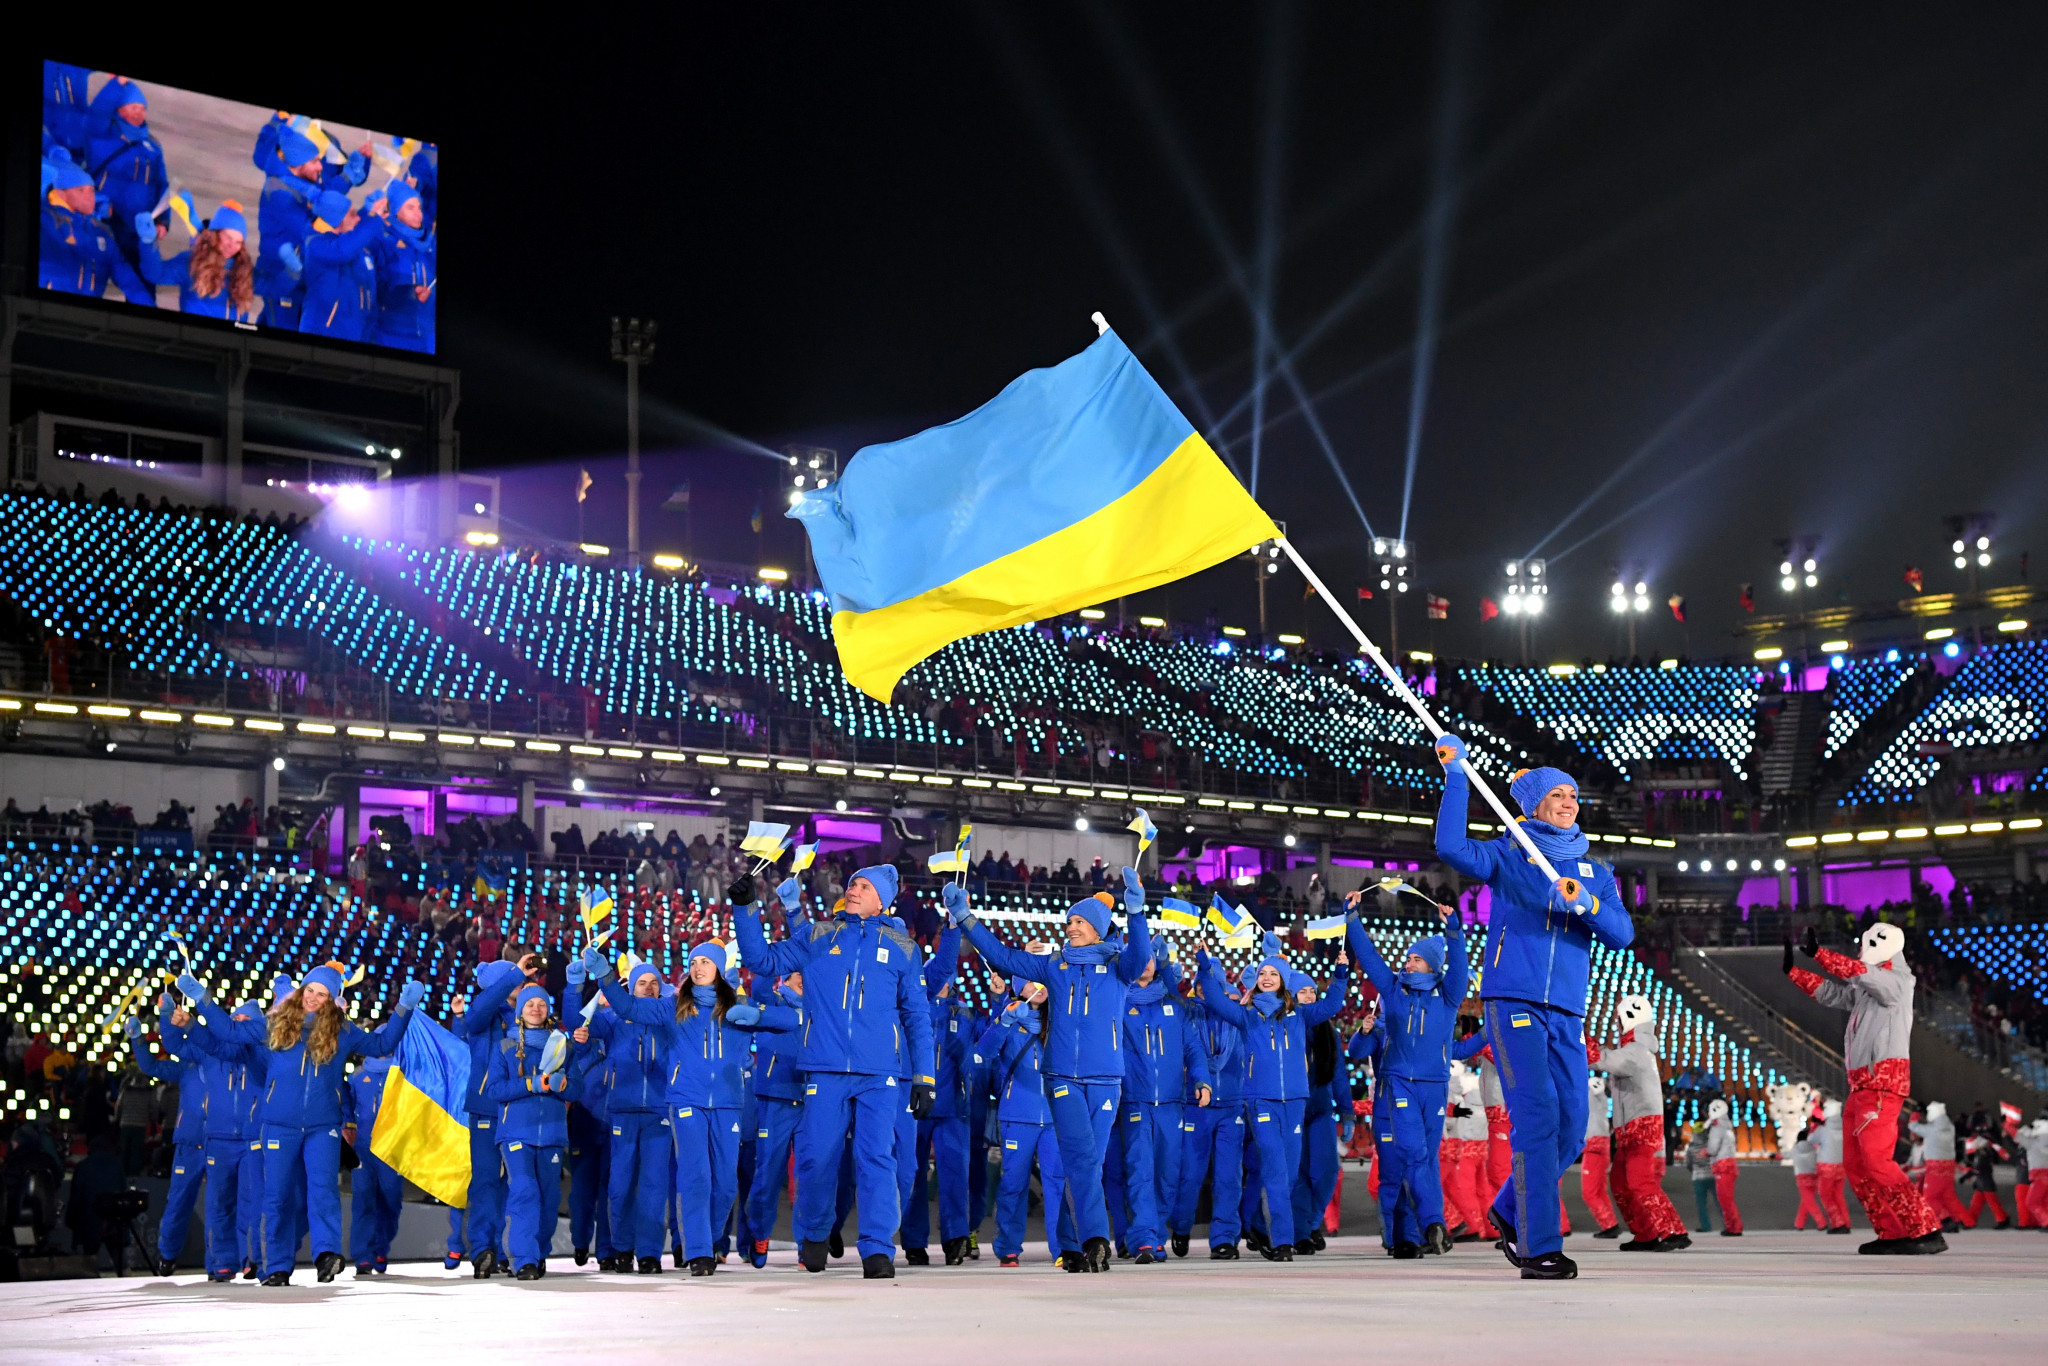 Psychology seminars to help overcome trauma of the war in Ukraine is one of the main pillars of the #OlympiansForUkraine campaign set up by the World Olympians Association ©Getty Images